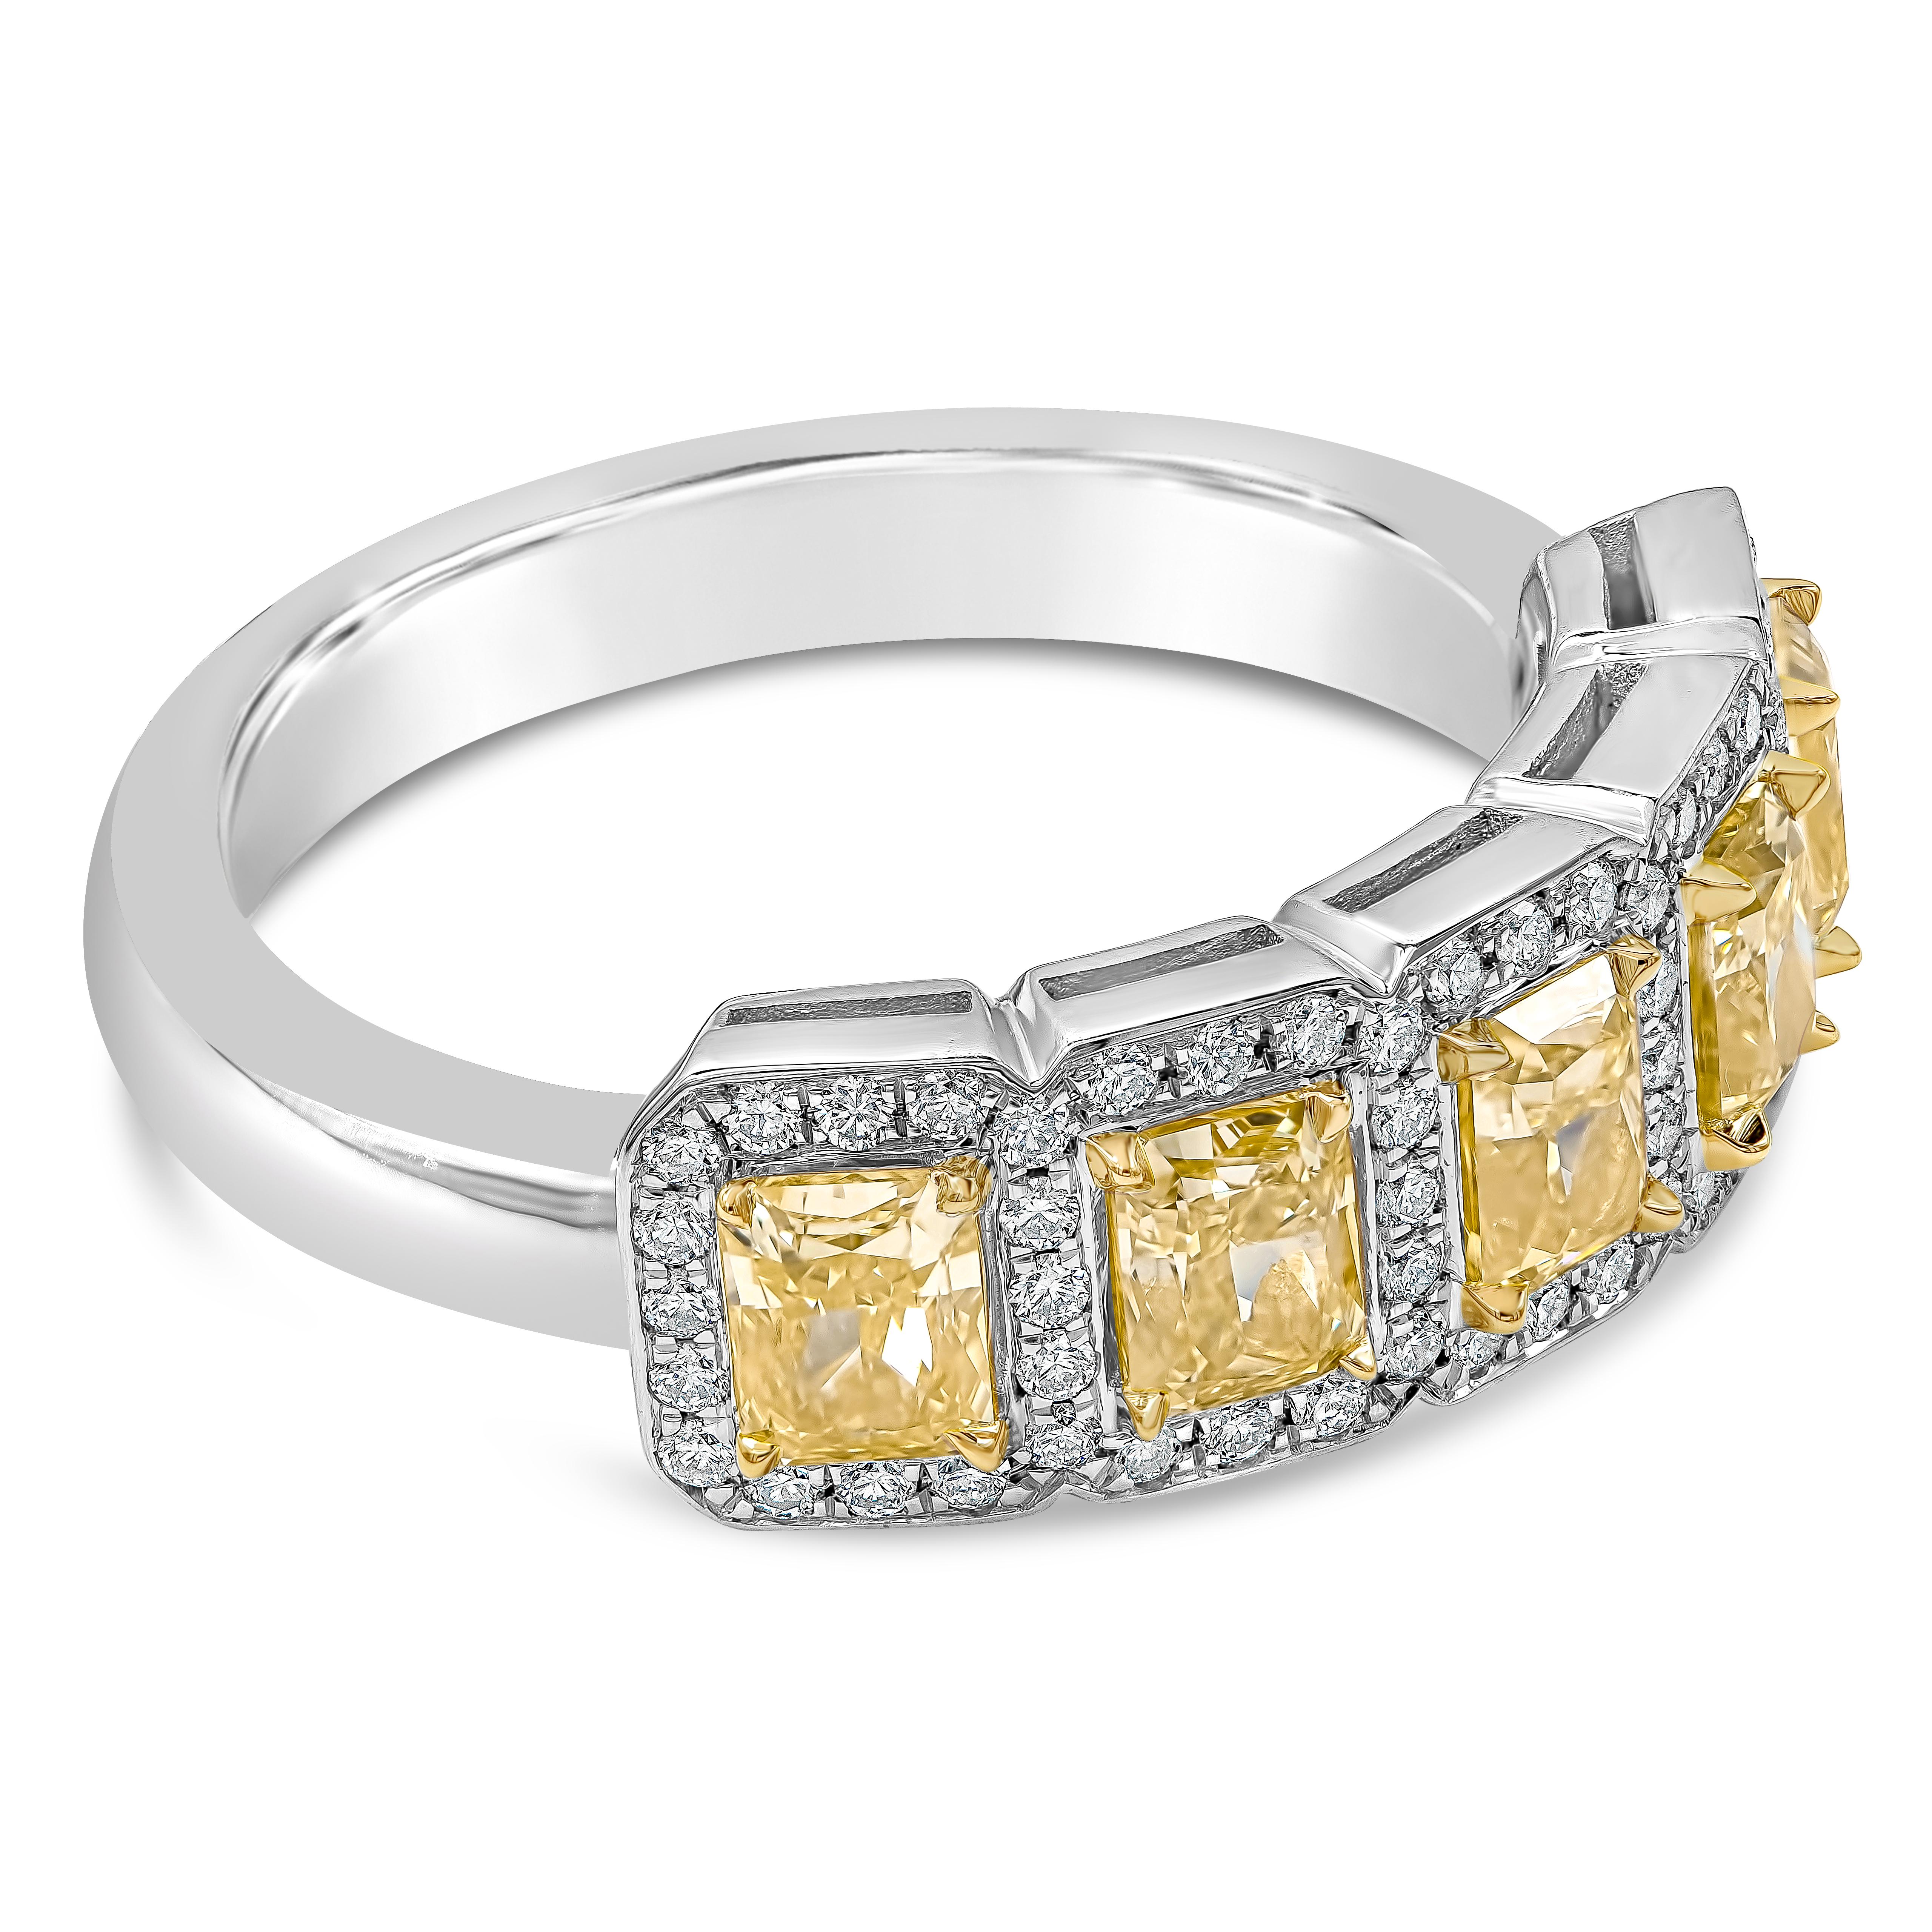 Features five radiant cut diamonds weighing 1.51 carats total fancy yellow diamond and VS in Clarity. Each diamond is surrounded by a single row of brilliant round diamonds set in a pave style weighing 0.25 carats total. Made with 18K yellow gold